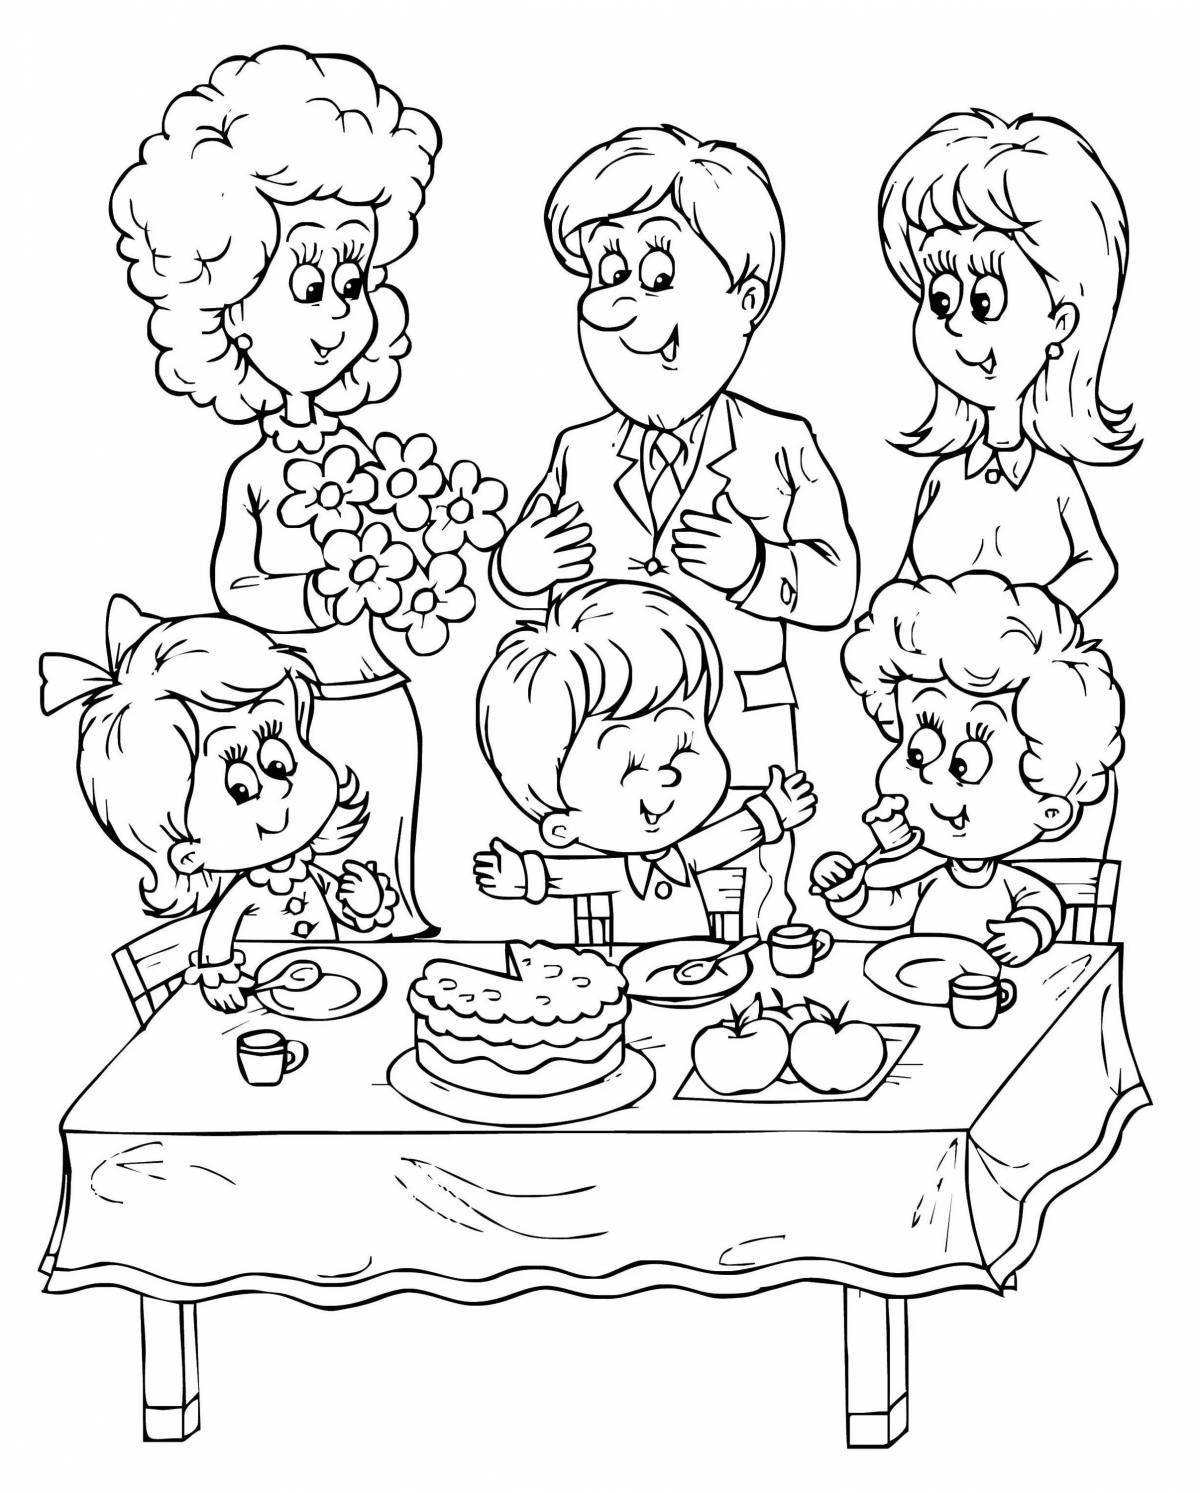 Coloring page merciful family at the table